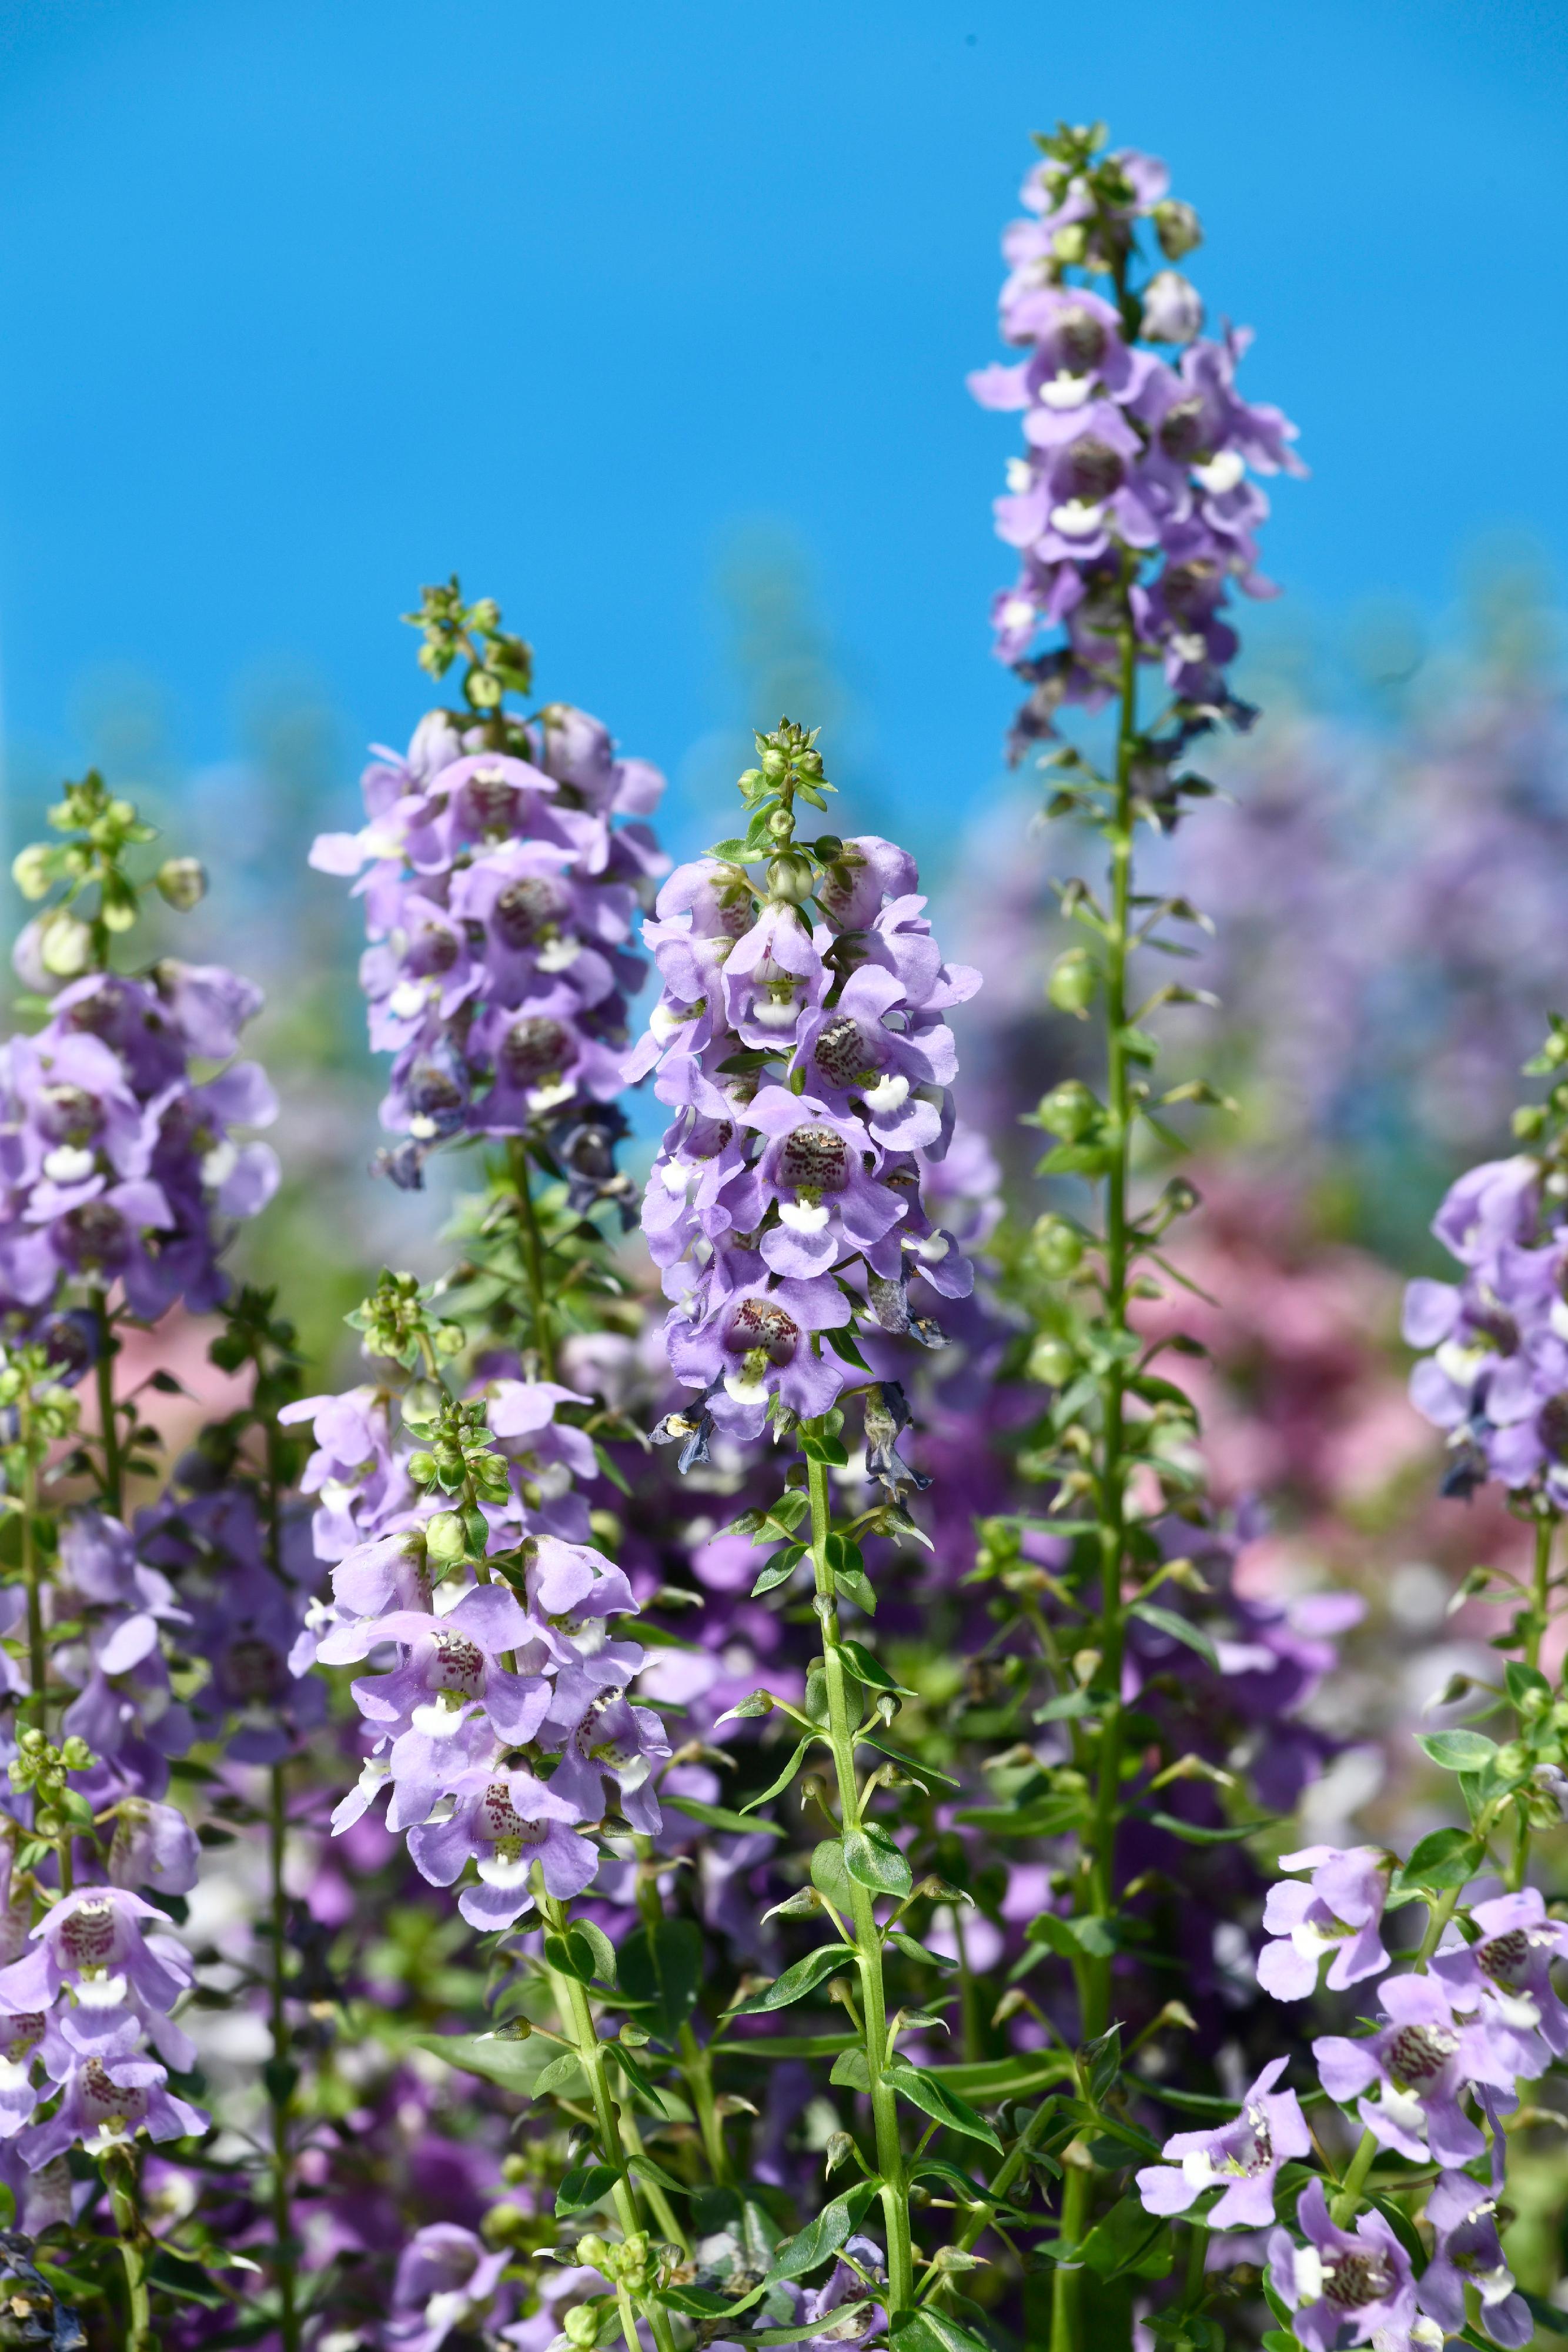 The Hong Kong Flower Show will be held at Victoria Park for 10 days from March 15 to 24, featuring the colourful angelonia as the theme flower and "Floral Joy Around Town" as the main theme. The petite and richly fragrant flowers of angelonia blossom from bottom up along the stem.

